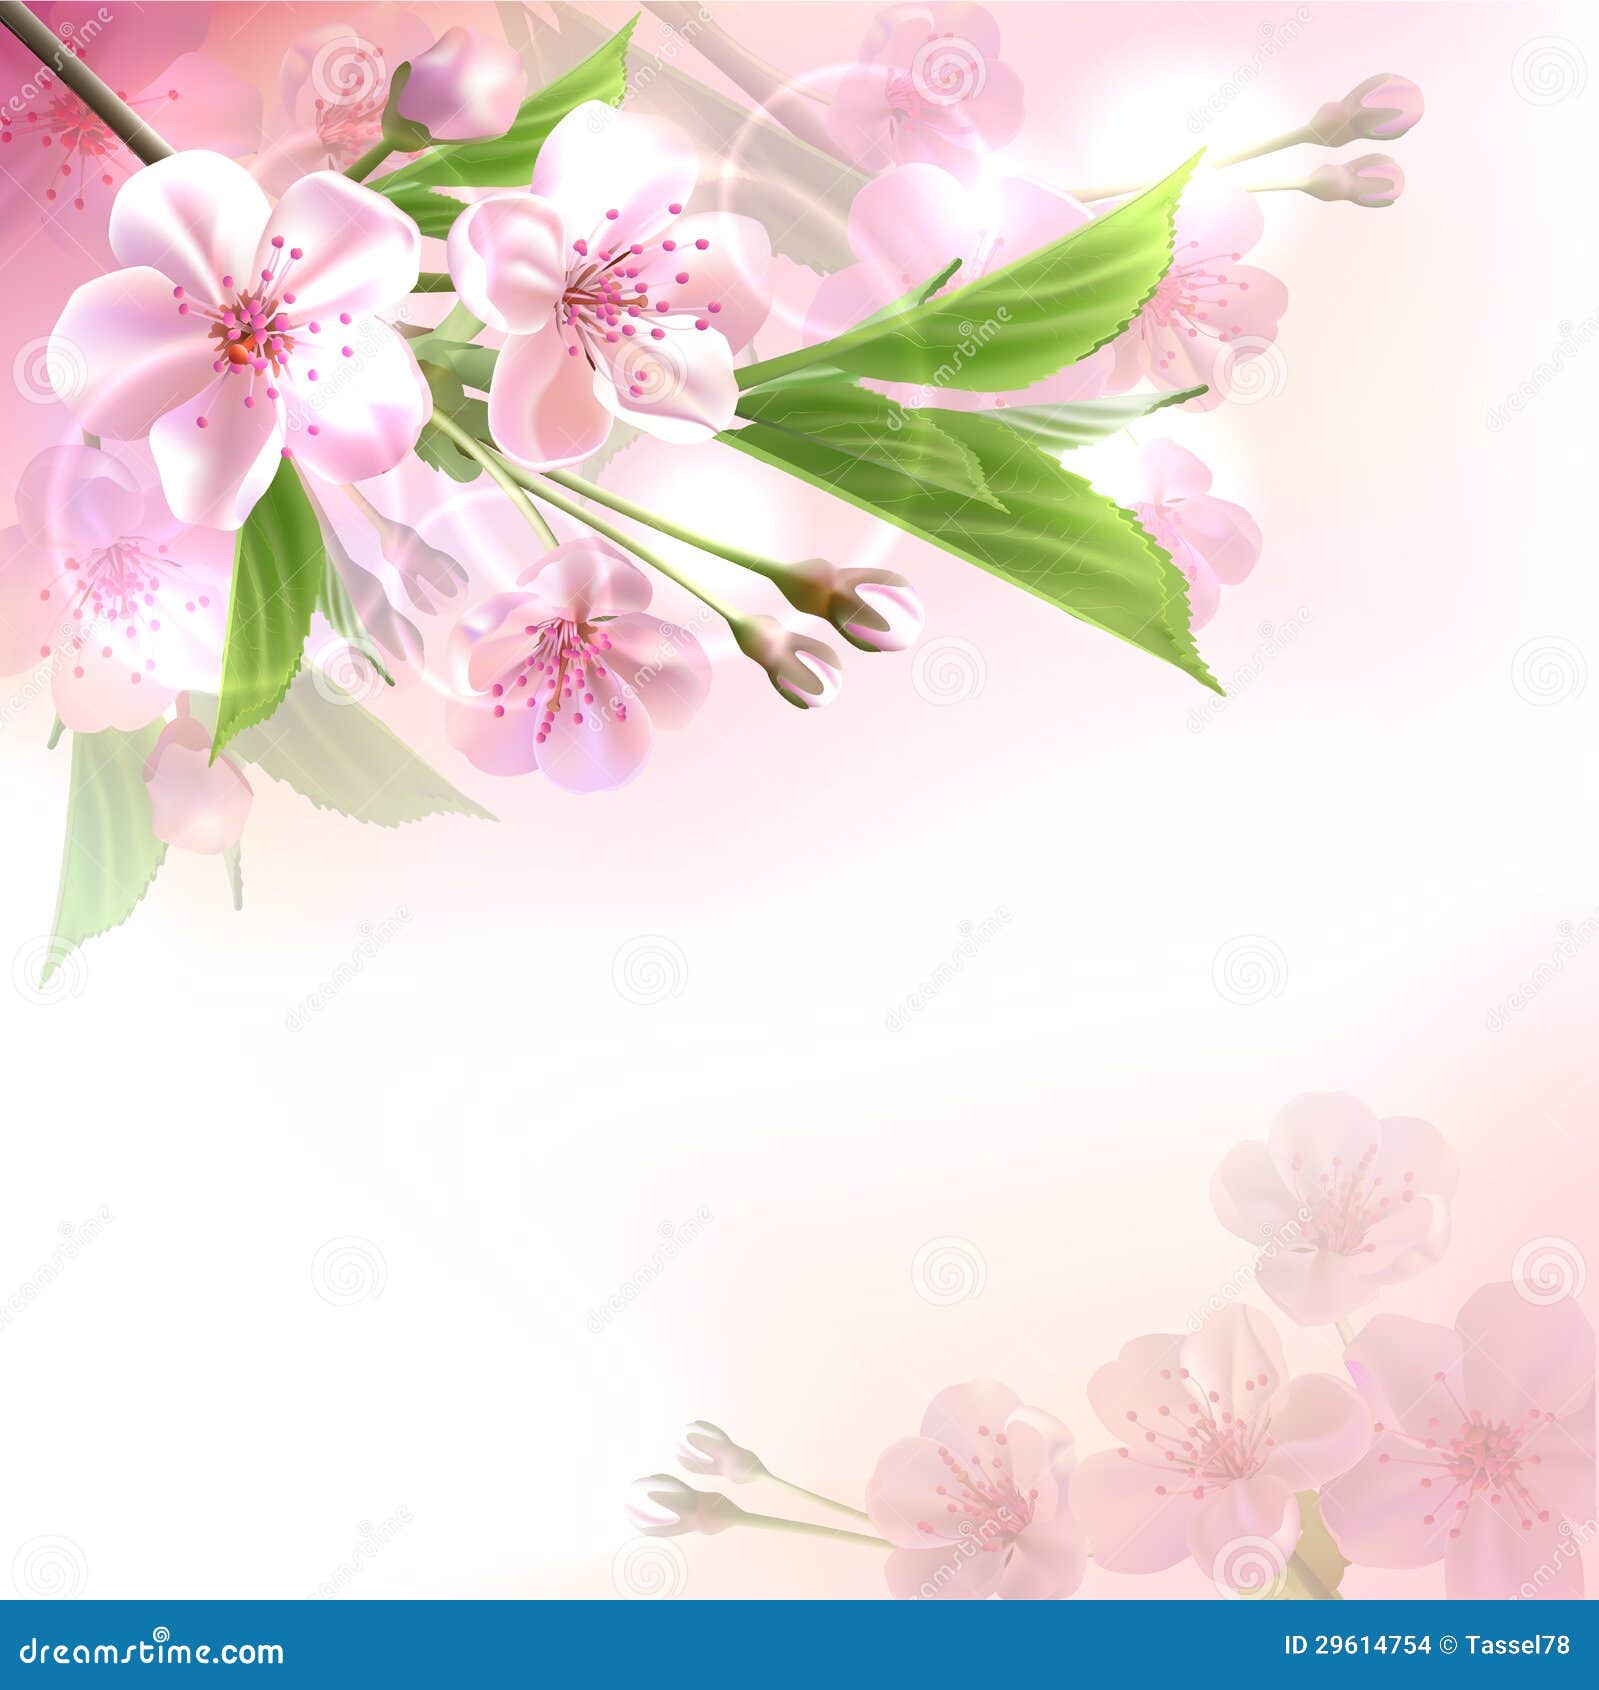 blossoming tree branch with pink flowers